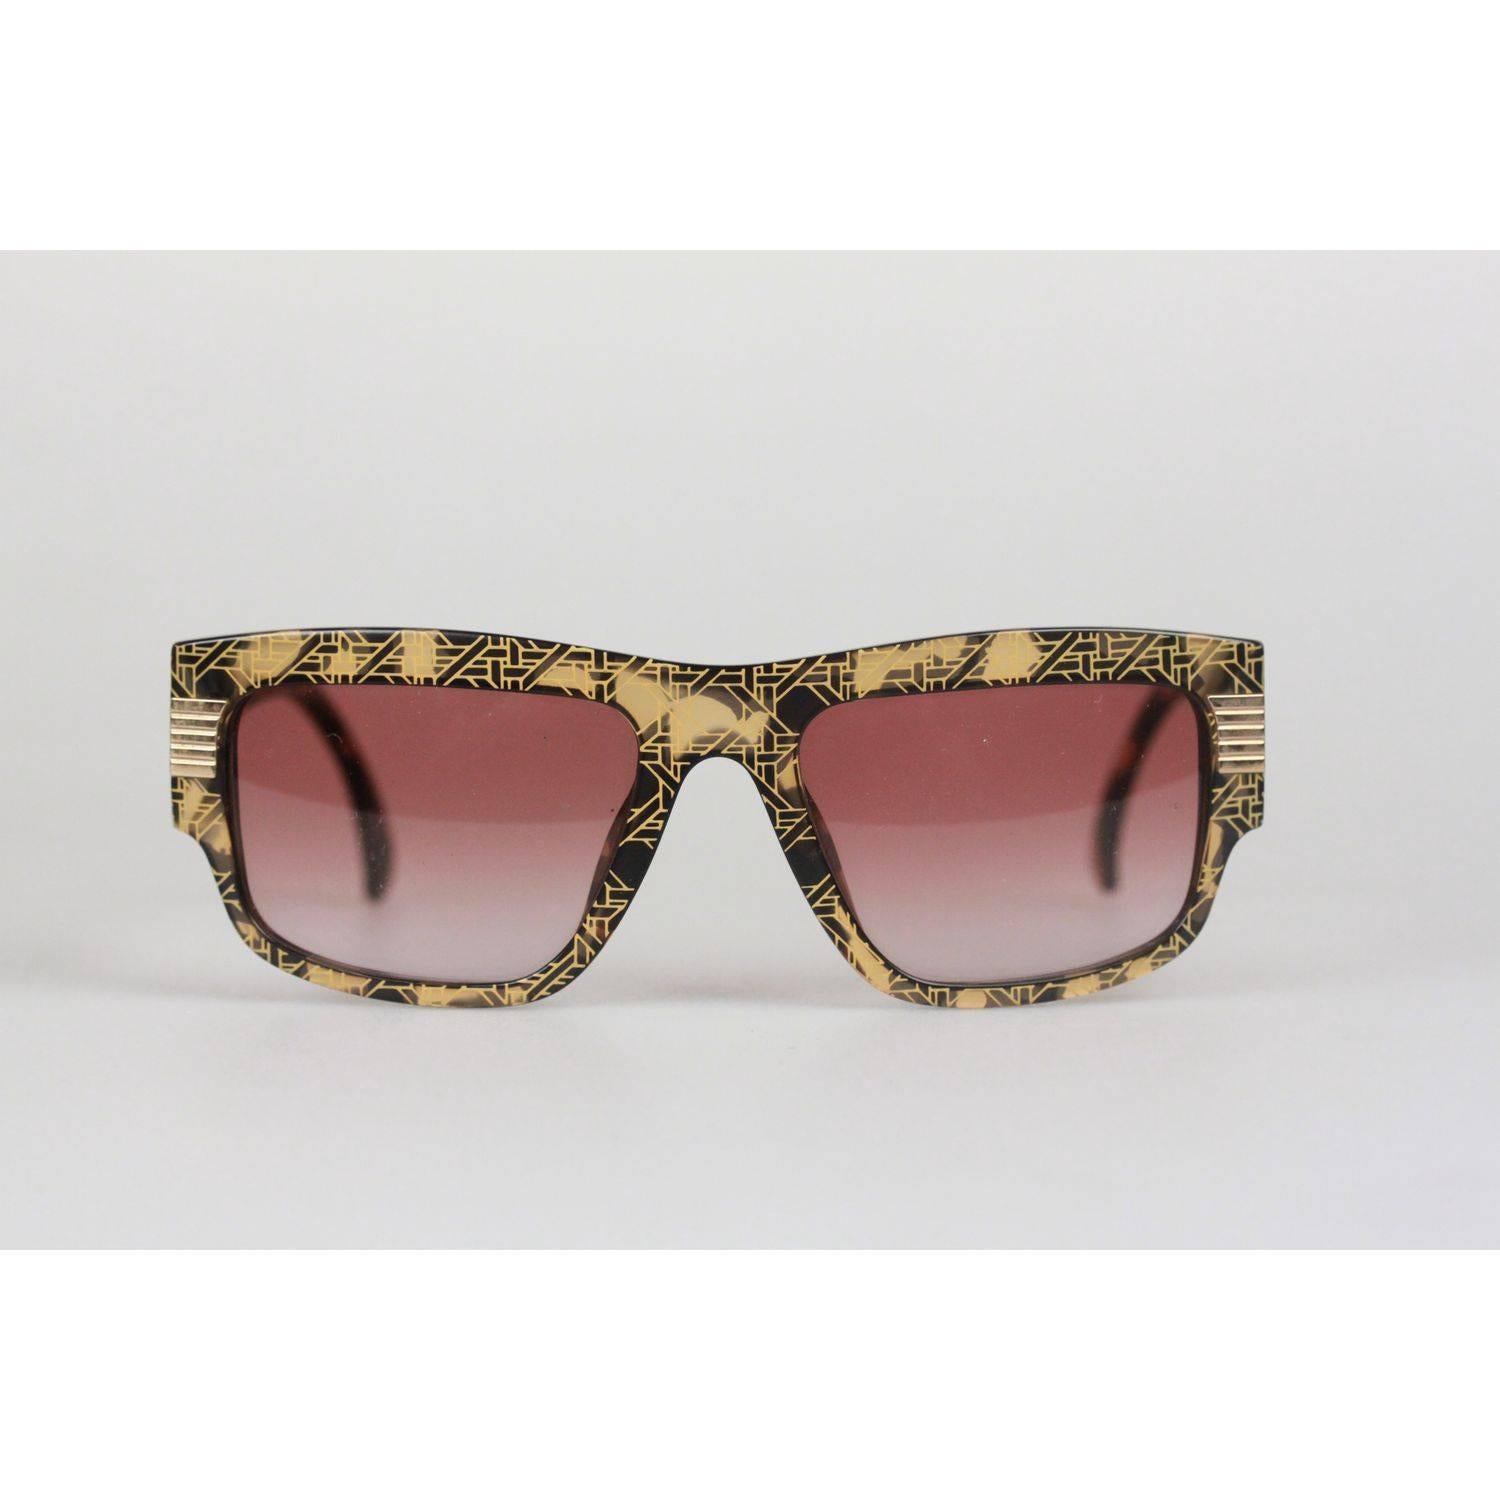 - CHRISTIAN DIOR - Optyl Frame, Made in Germany
- Mod. 2607 - 91 - 53/18
- Made of black thick frame, with CANNAGE pattern,  combined with gold parts at the hinge and arms
- Wide arms with CD logo on the temples
- Gradient brown